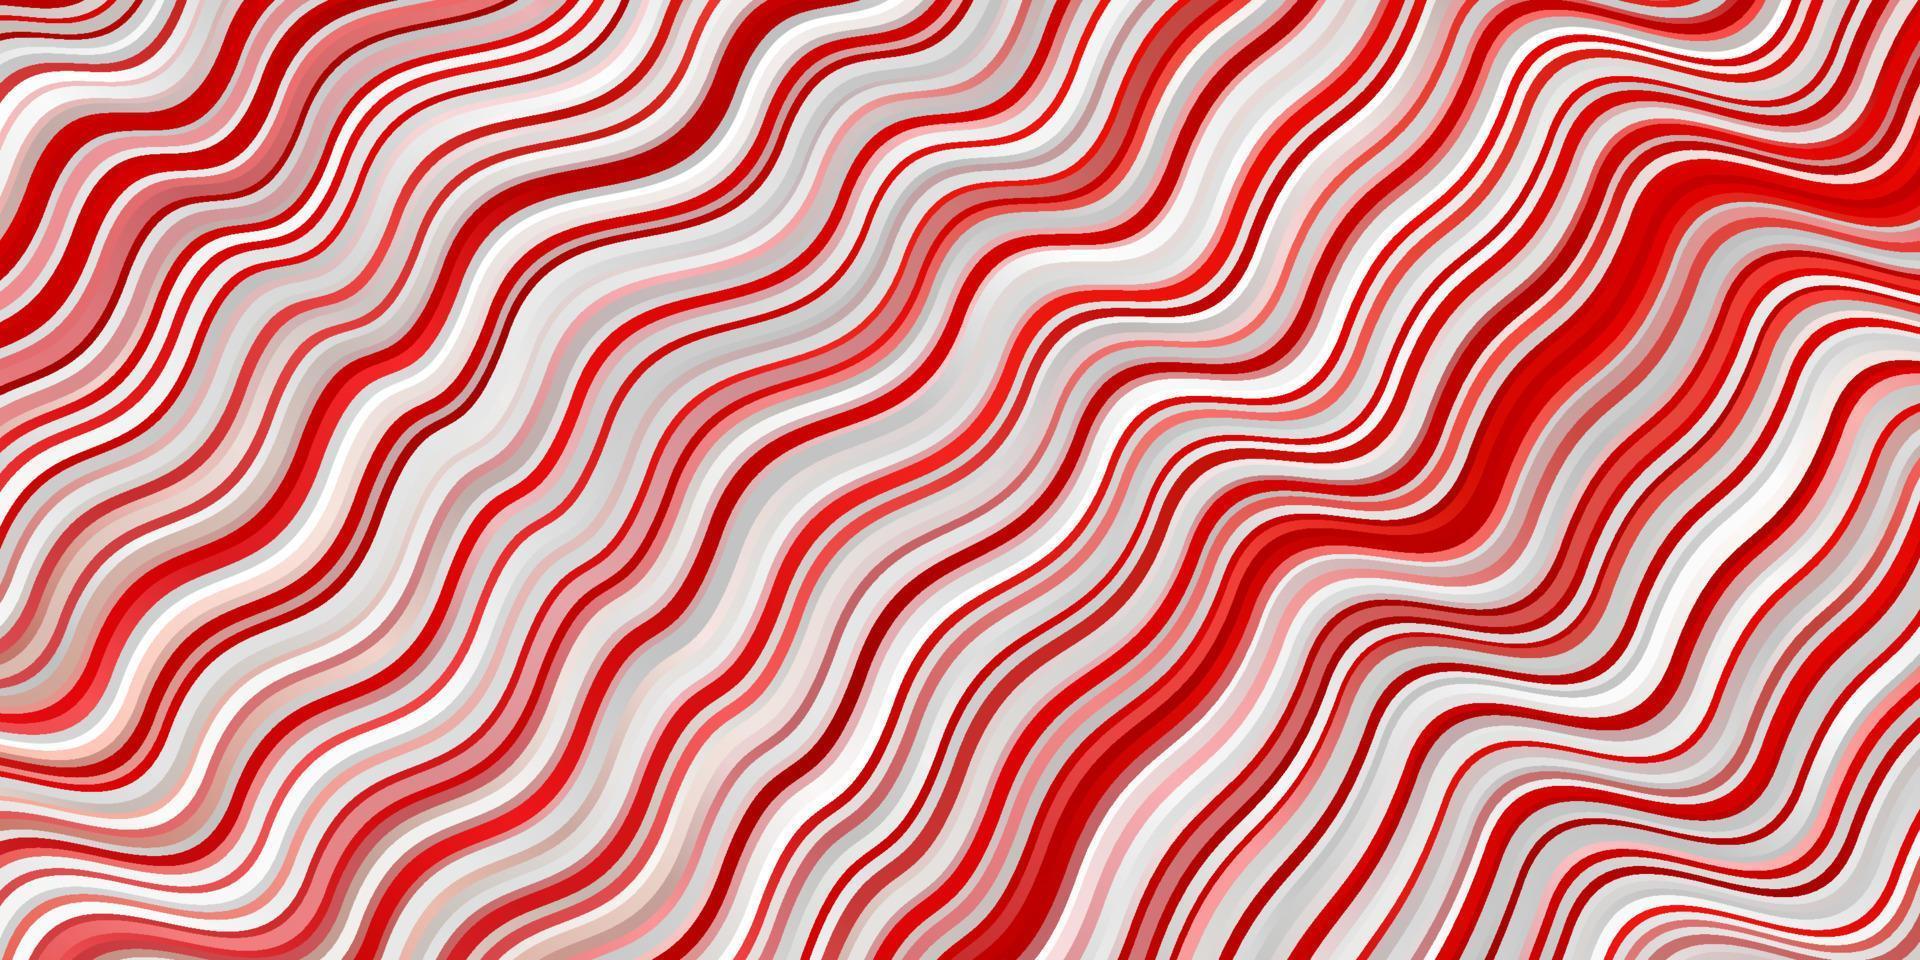 Light Red vector pattern with curves.